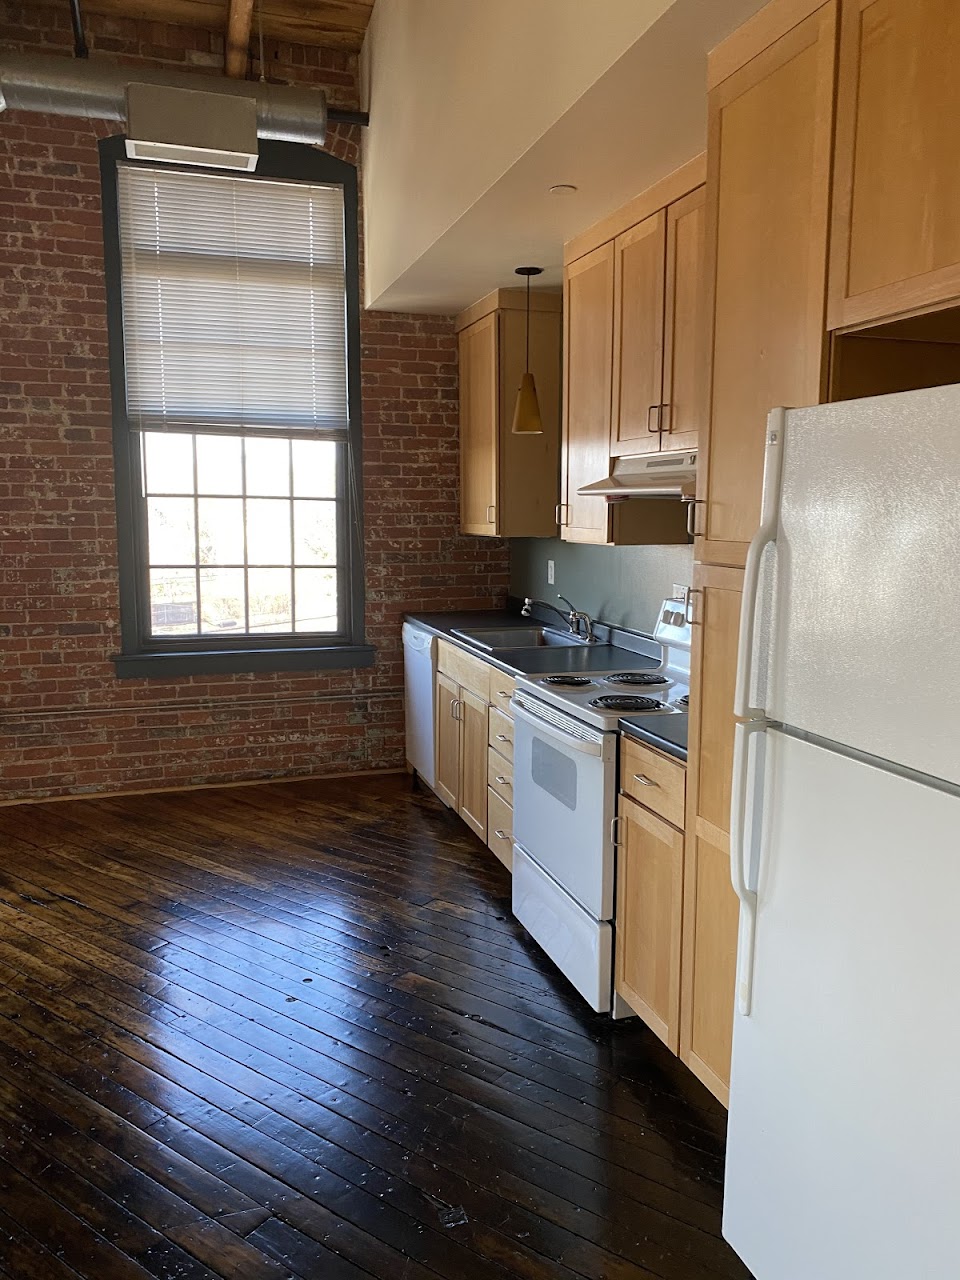 Photo of WESTFIELD LOFTS. Affordable housing located at 230 DEXTER ST PROVIDENCE, RI 02907